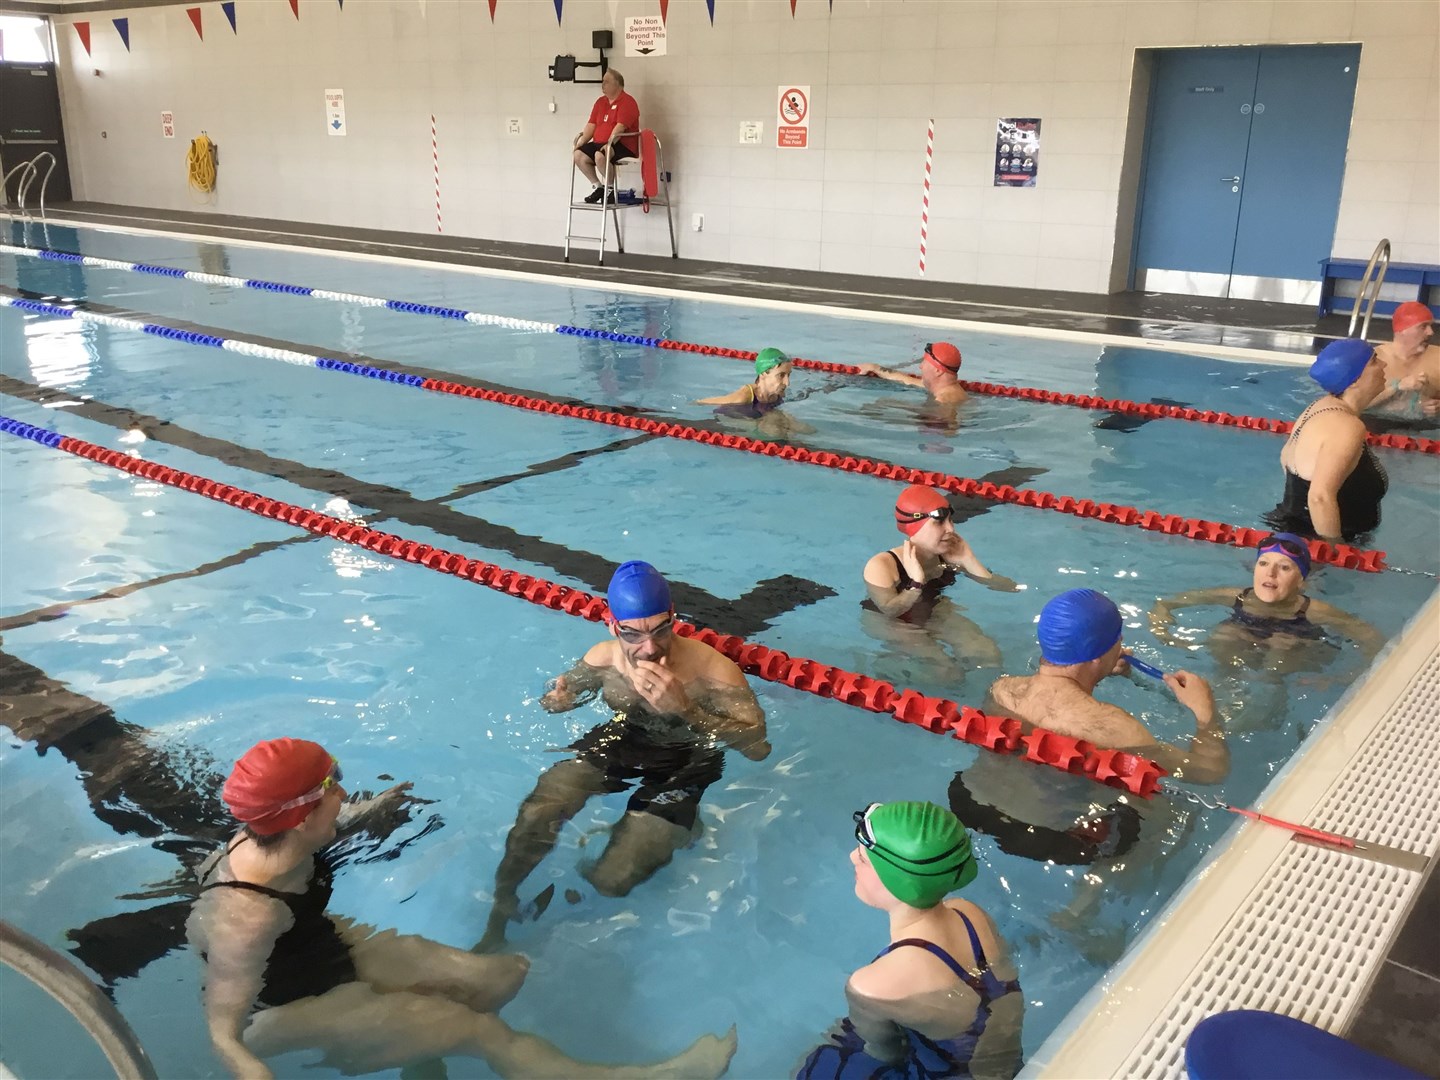 Competitiors gear up to take part in the 800-metre swim.